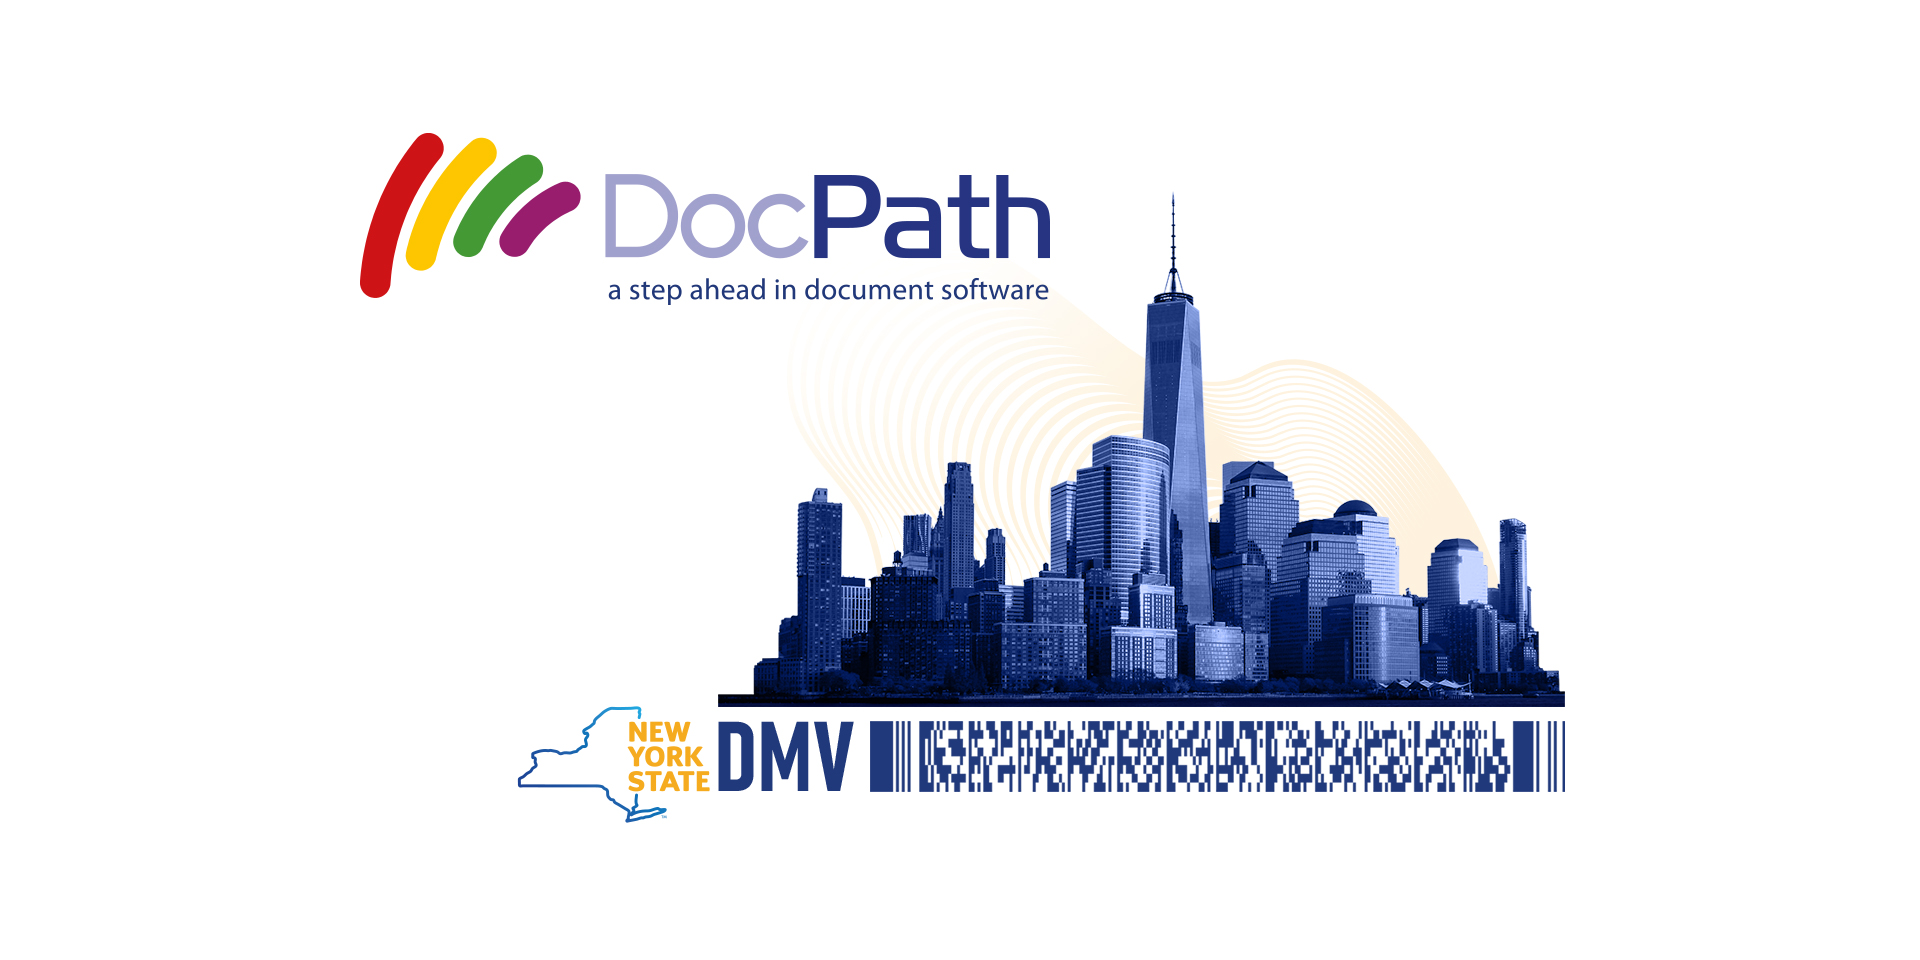 The DMV project was completed using DocPath's existing document software developed specifically for the security and durability requirements of organizations.